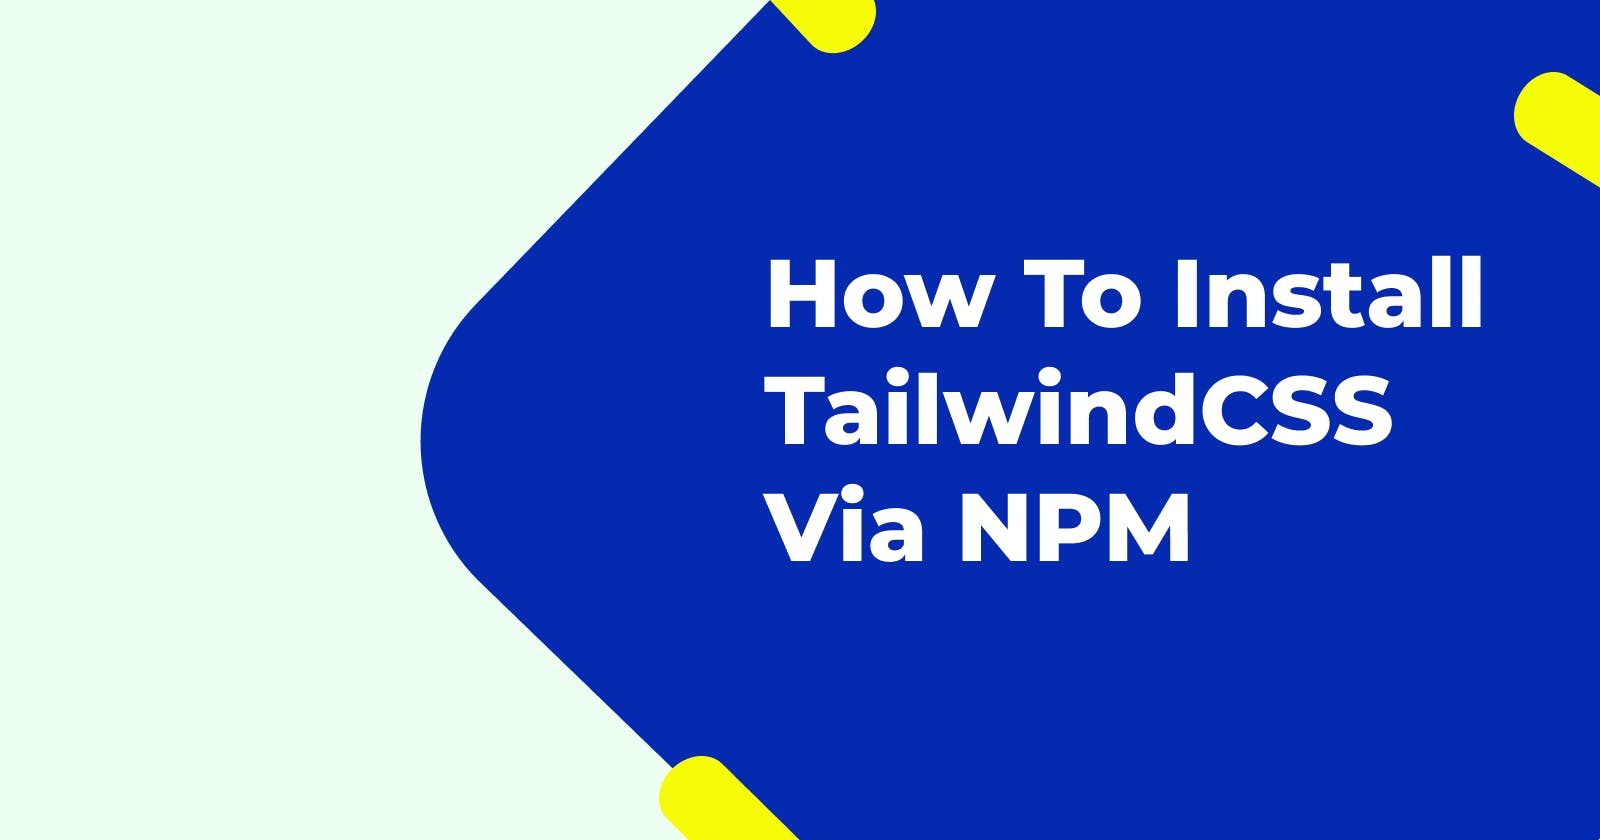 Complete Guide On How To Install Tailwindcss Via NPM